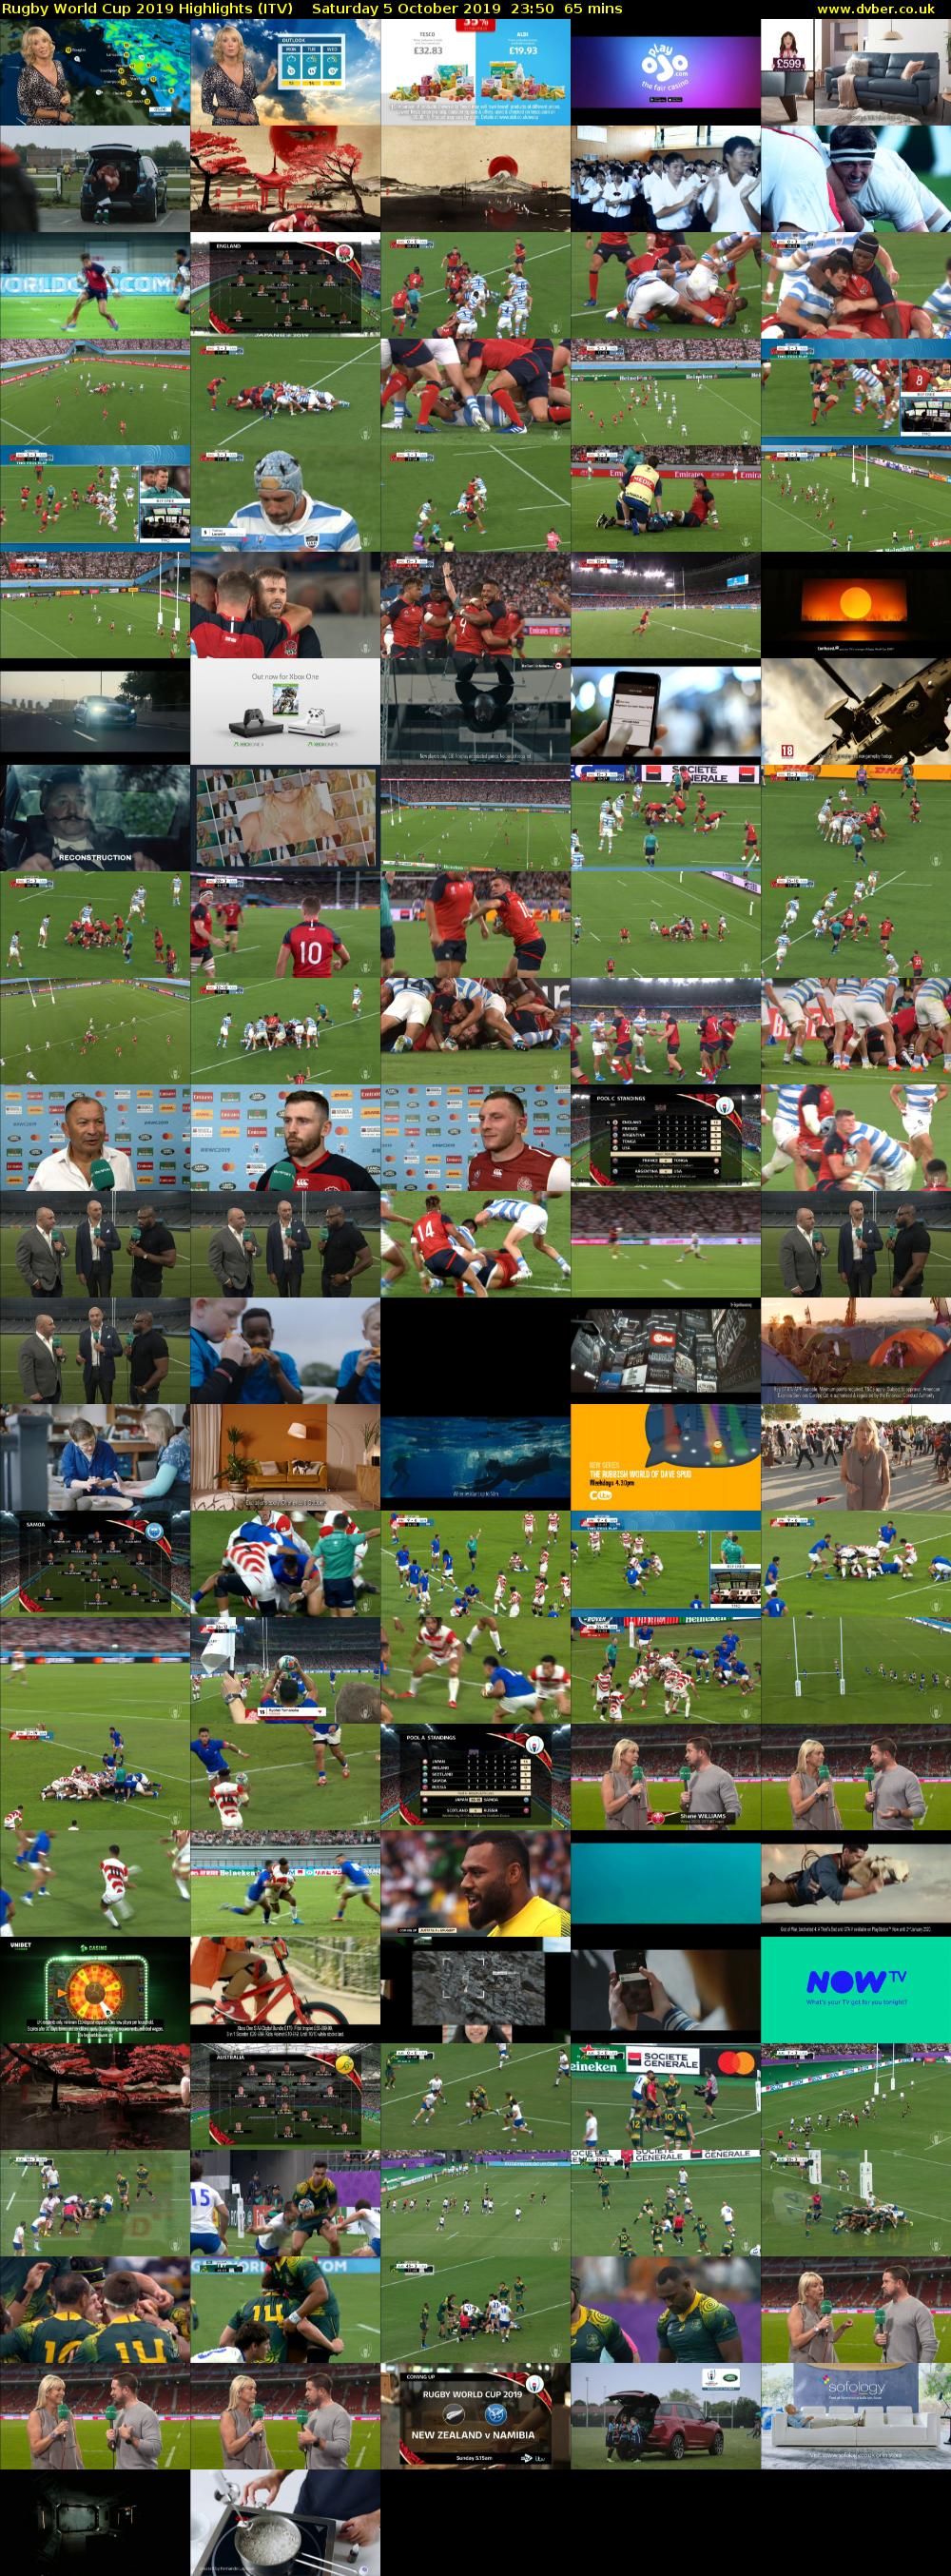 Rugby World Cup 2019 Highlights (ITV) Saturday 5 October 2019 23:50 - 00:55